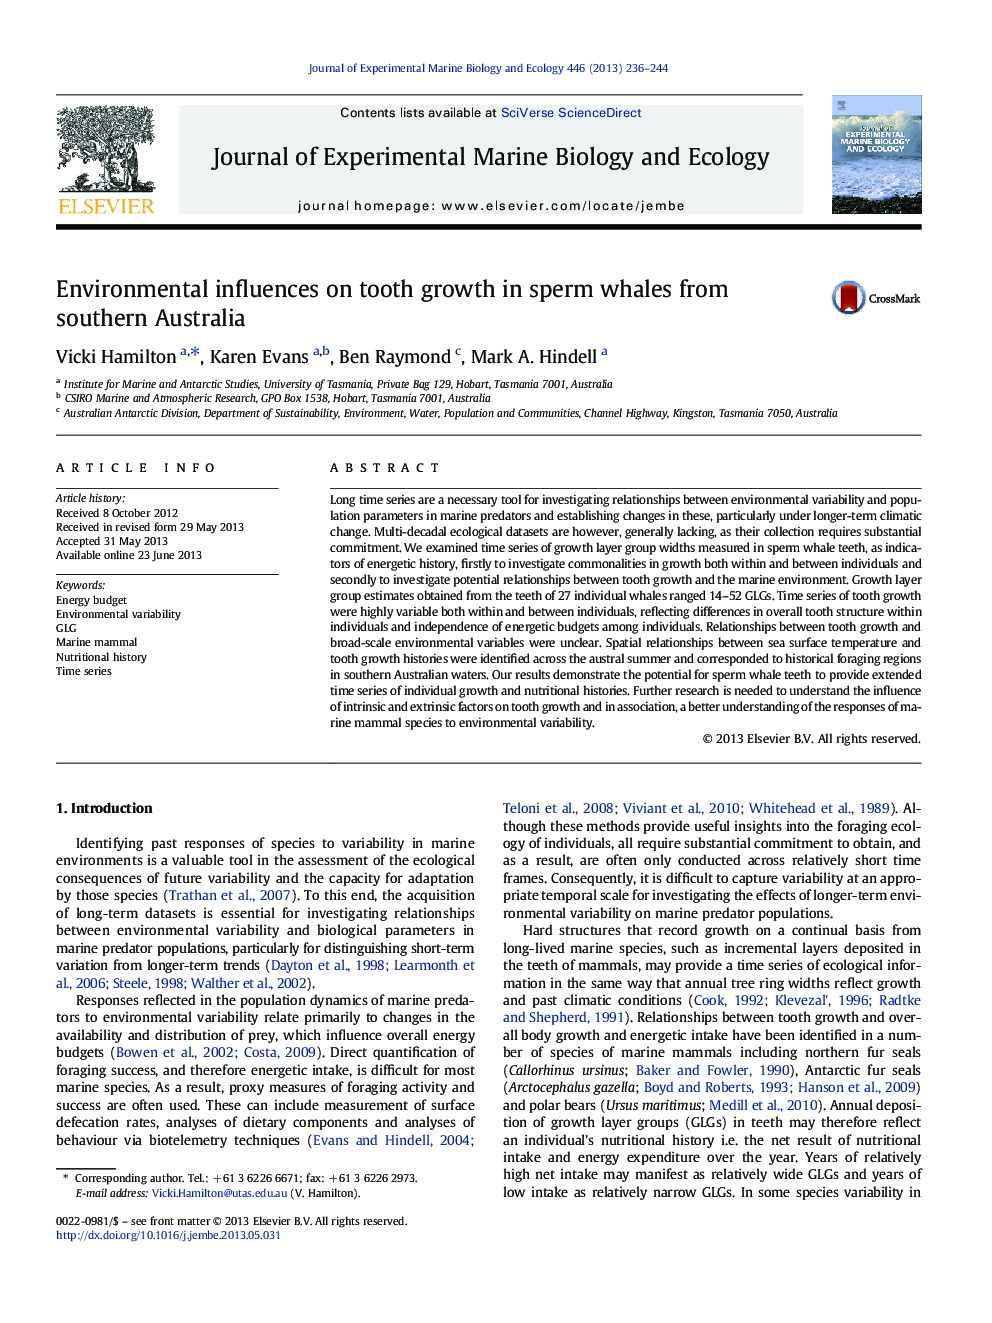 Environmental influences on tooth growth in sperm whales from southern Australia